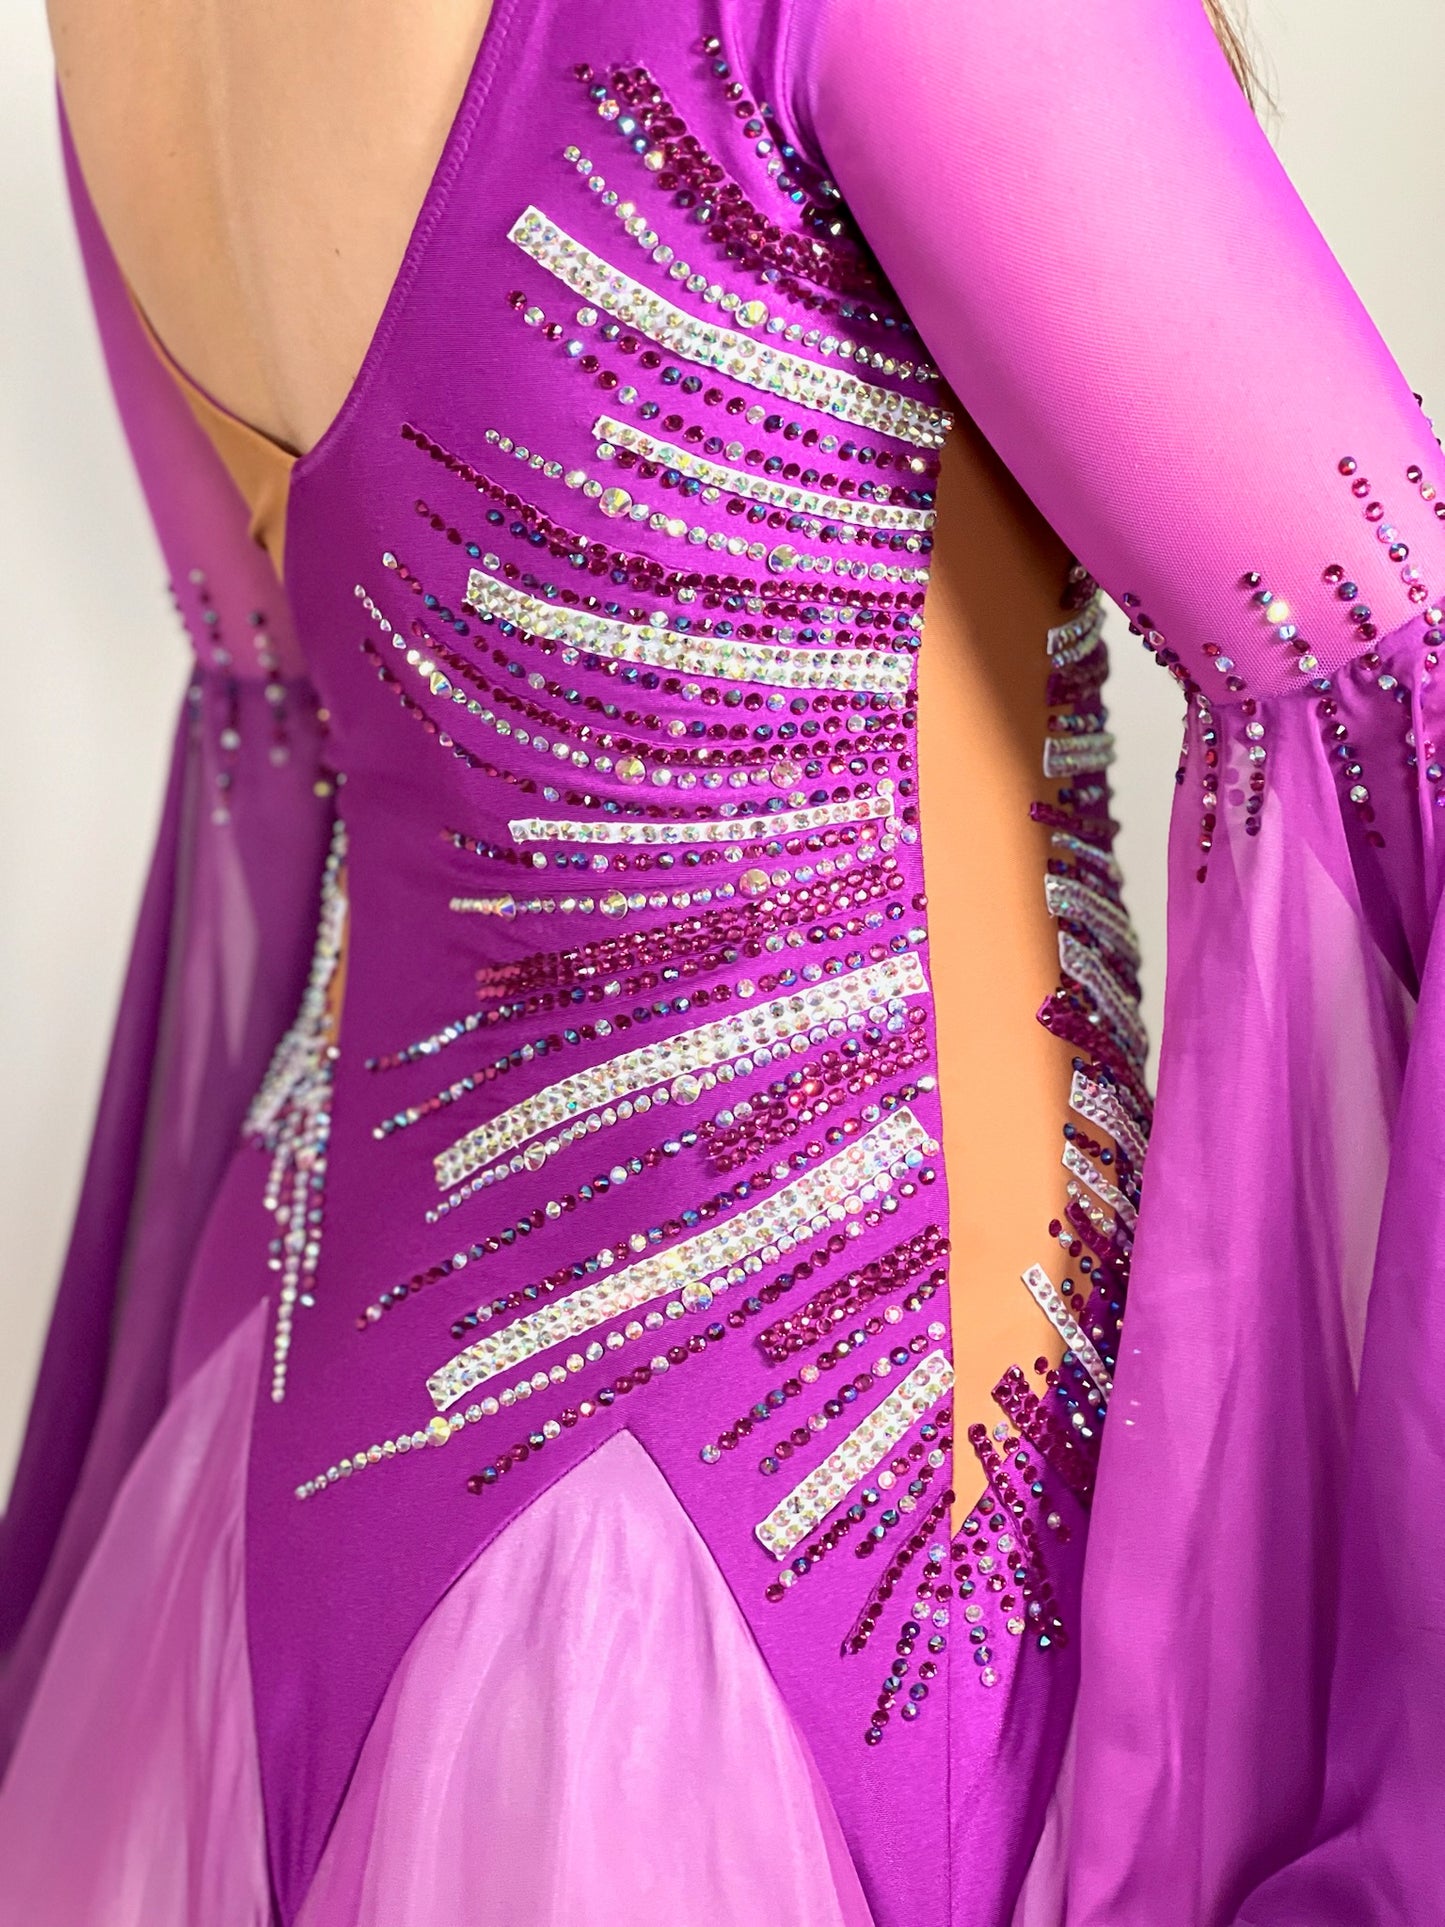 055 Bright Magenta & White Competition Ballroom Dress. Ombré Bell sleeve detail. Stoned in Rose, Rose AB & AB